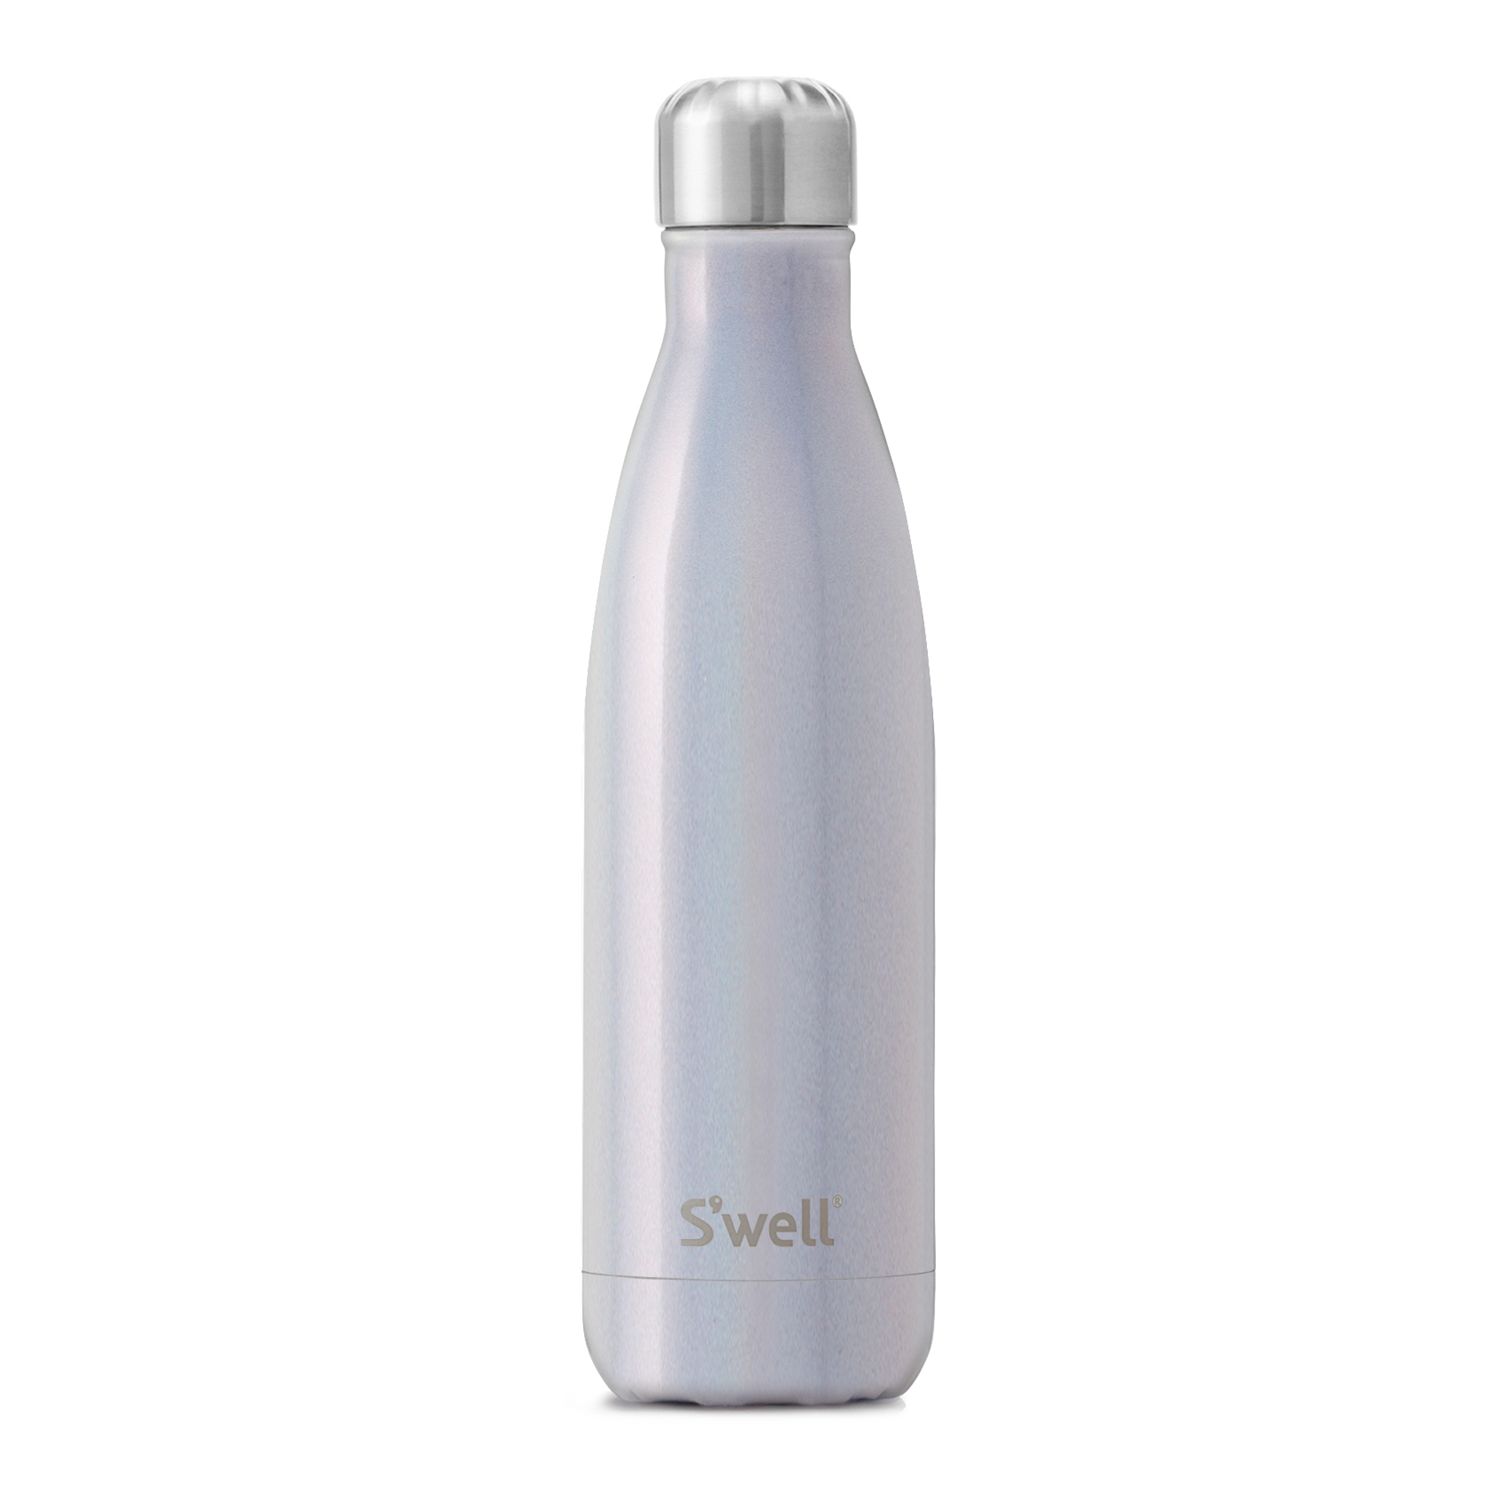 places that sell swell water bottles